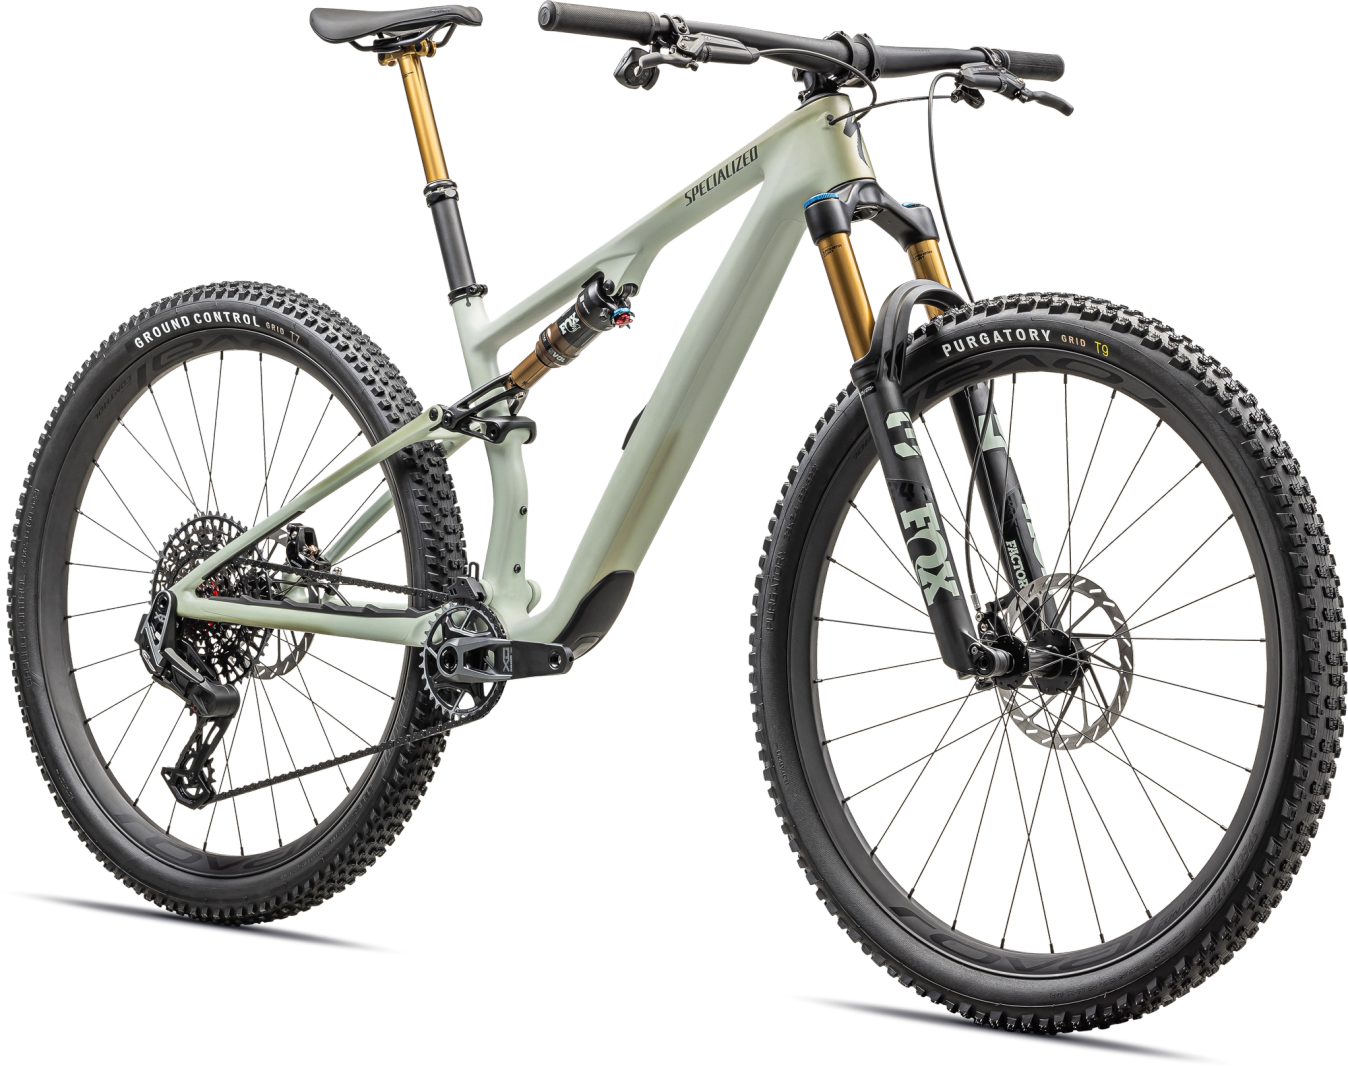 The Epic 8 EVO now sits closer to the trail specific Stumpjumper 